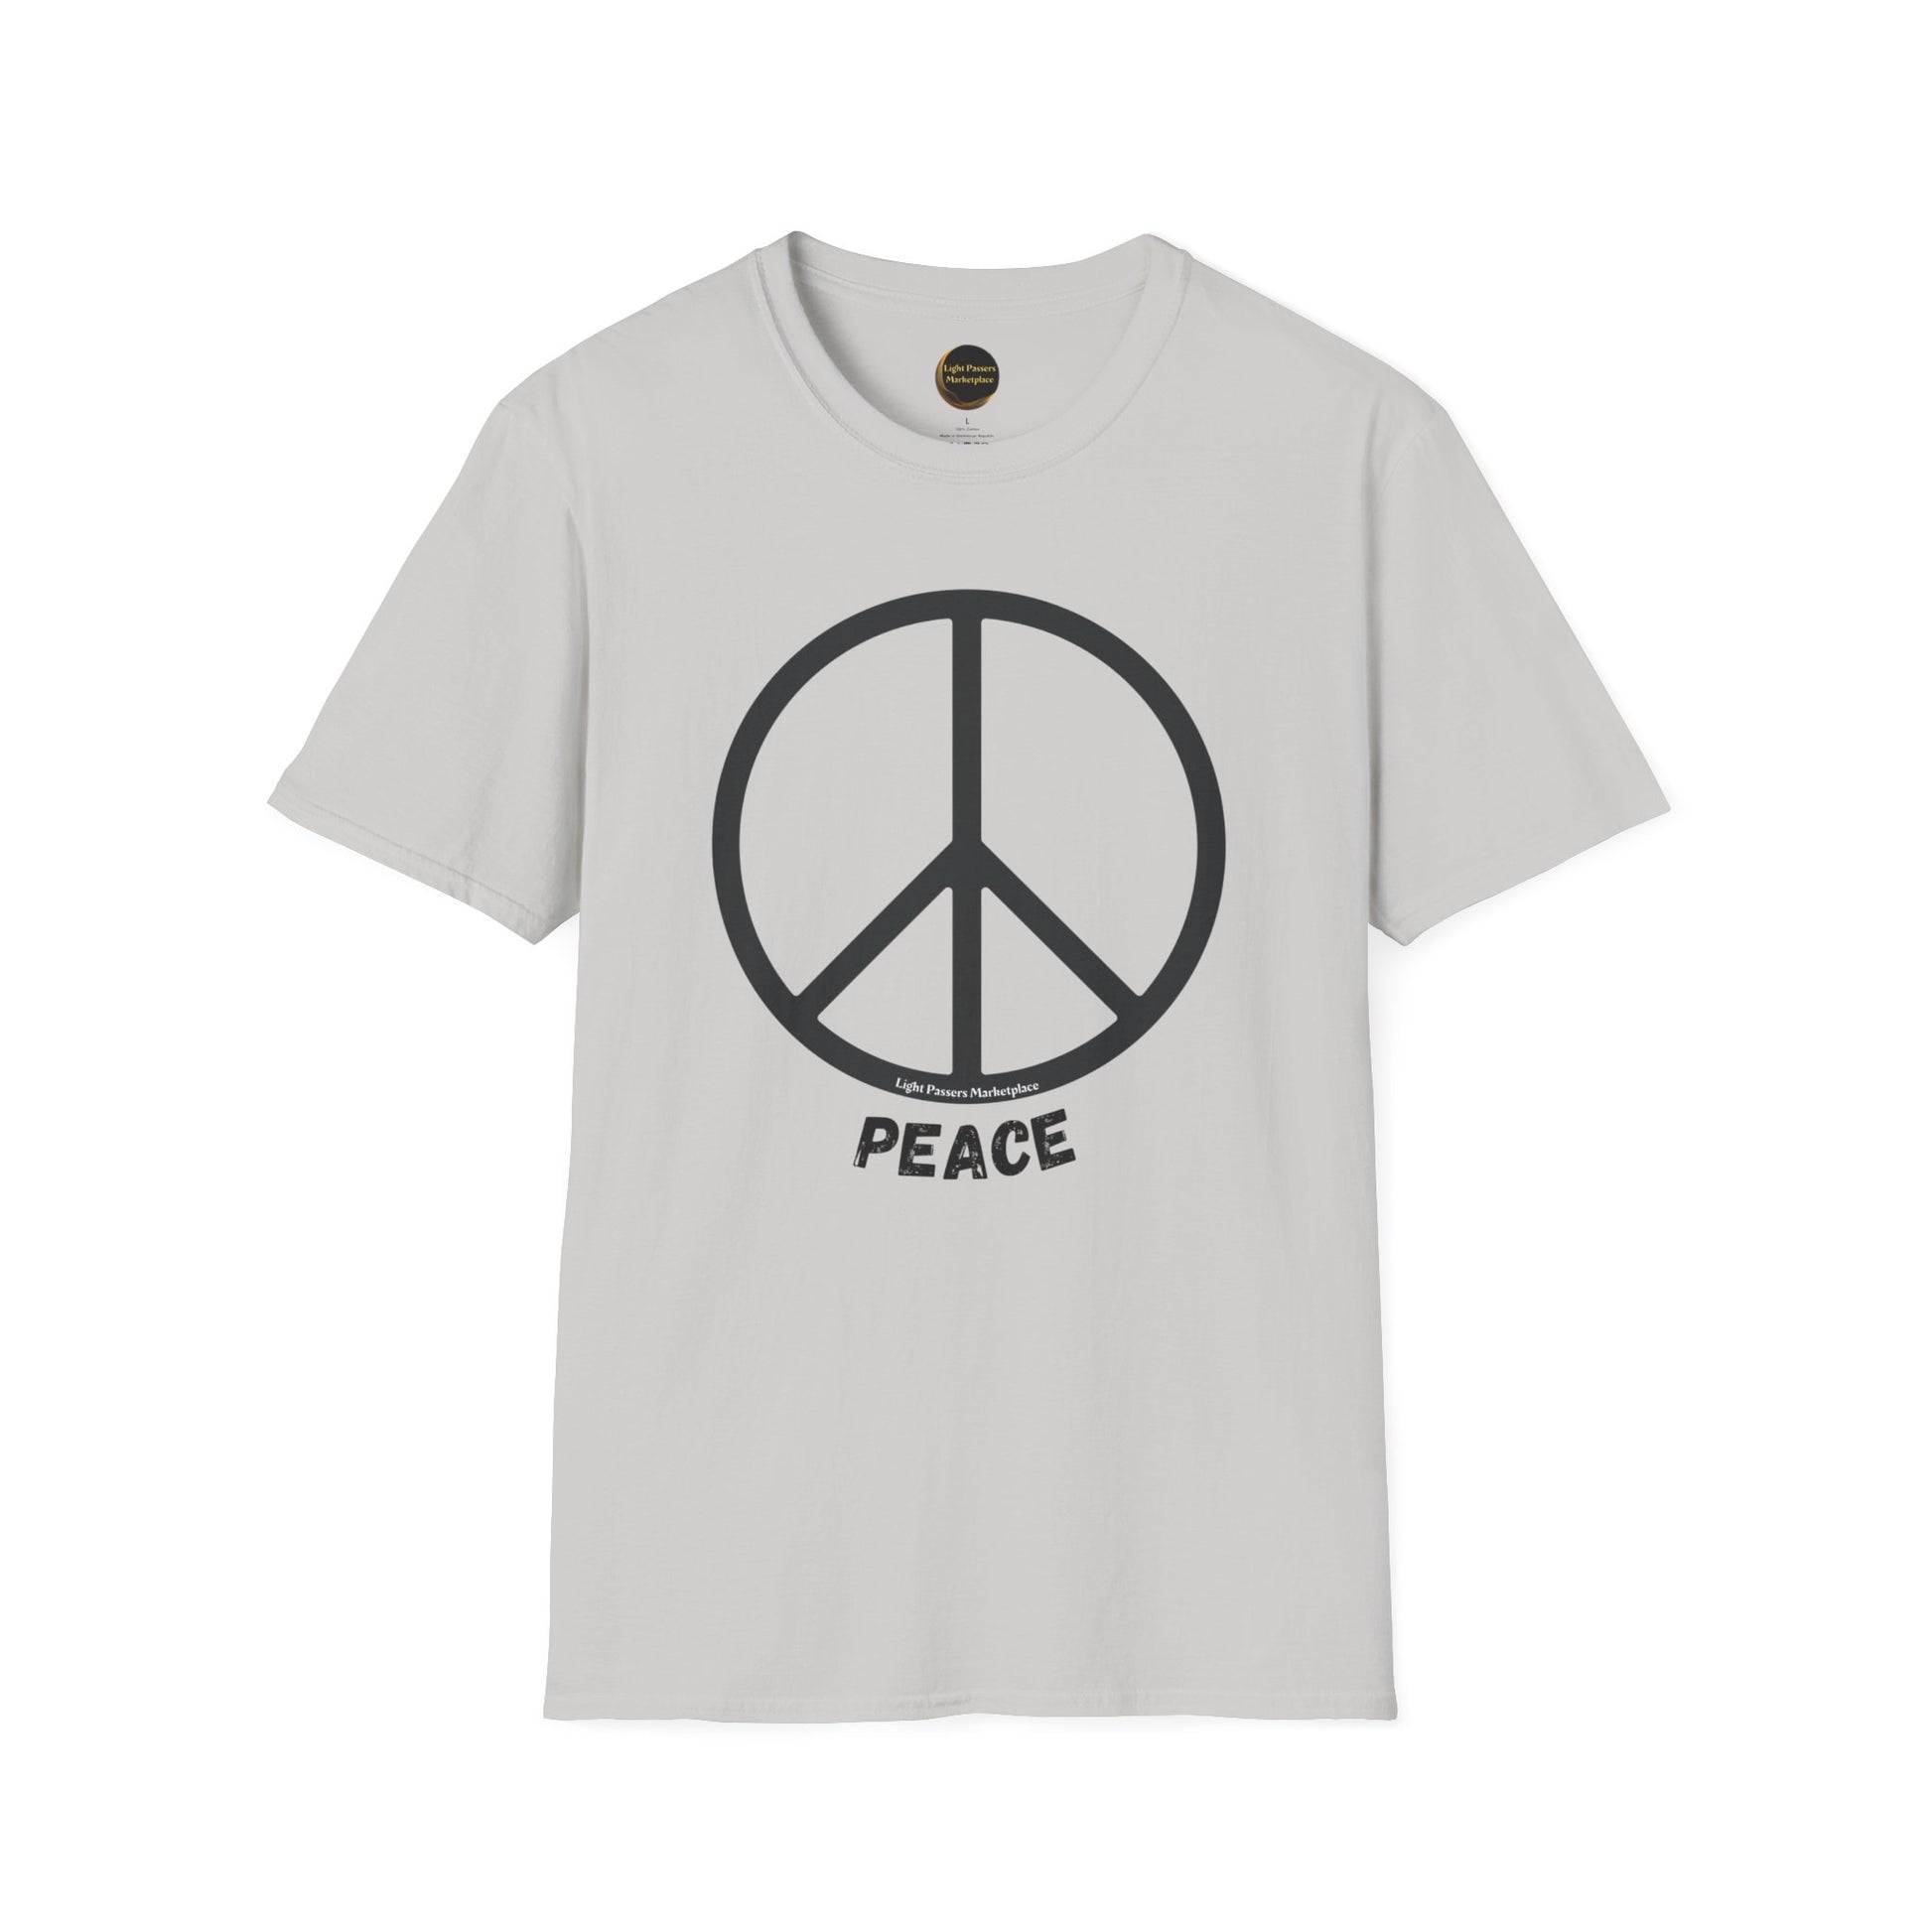 A soft white unisex t-shirt featuring a peace symbol design. Made of 100% ring-spun cotton, lightweight and durable, with a clean crew neckline and tear-away label for comfort. Ethically sourced and Oeko-Tex certified.